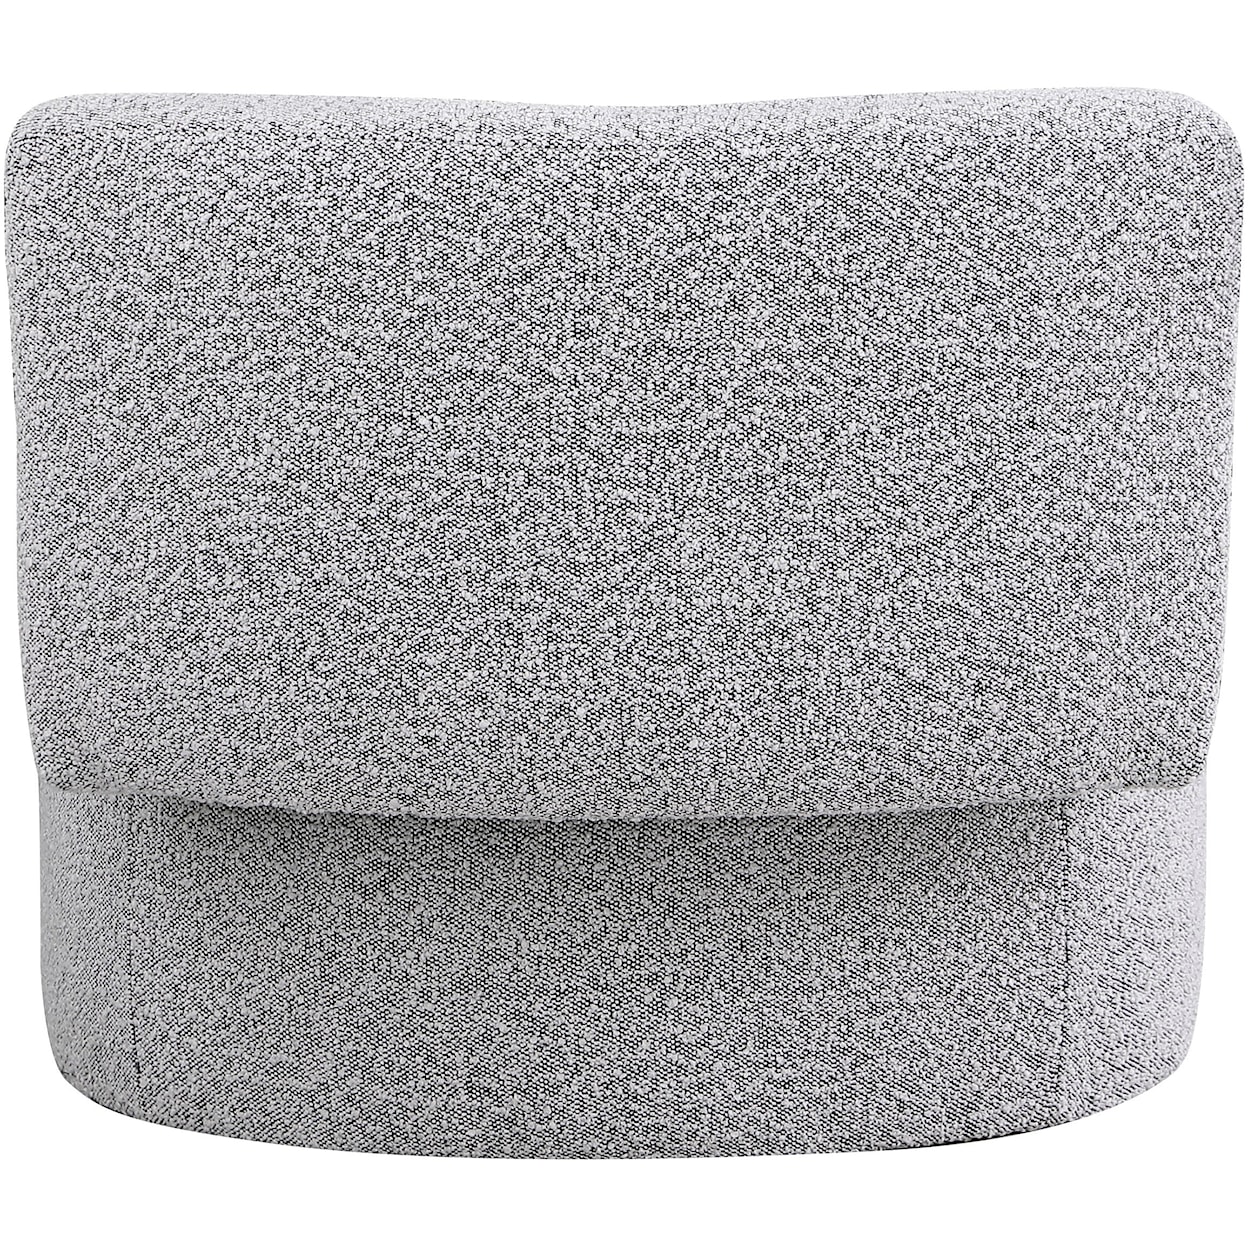 Meridian Furniture Como Upholstered Grey Boucle Fabric Accent Chair